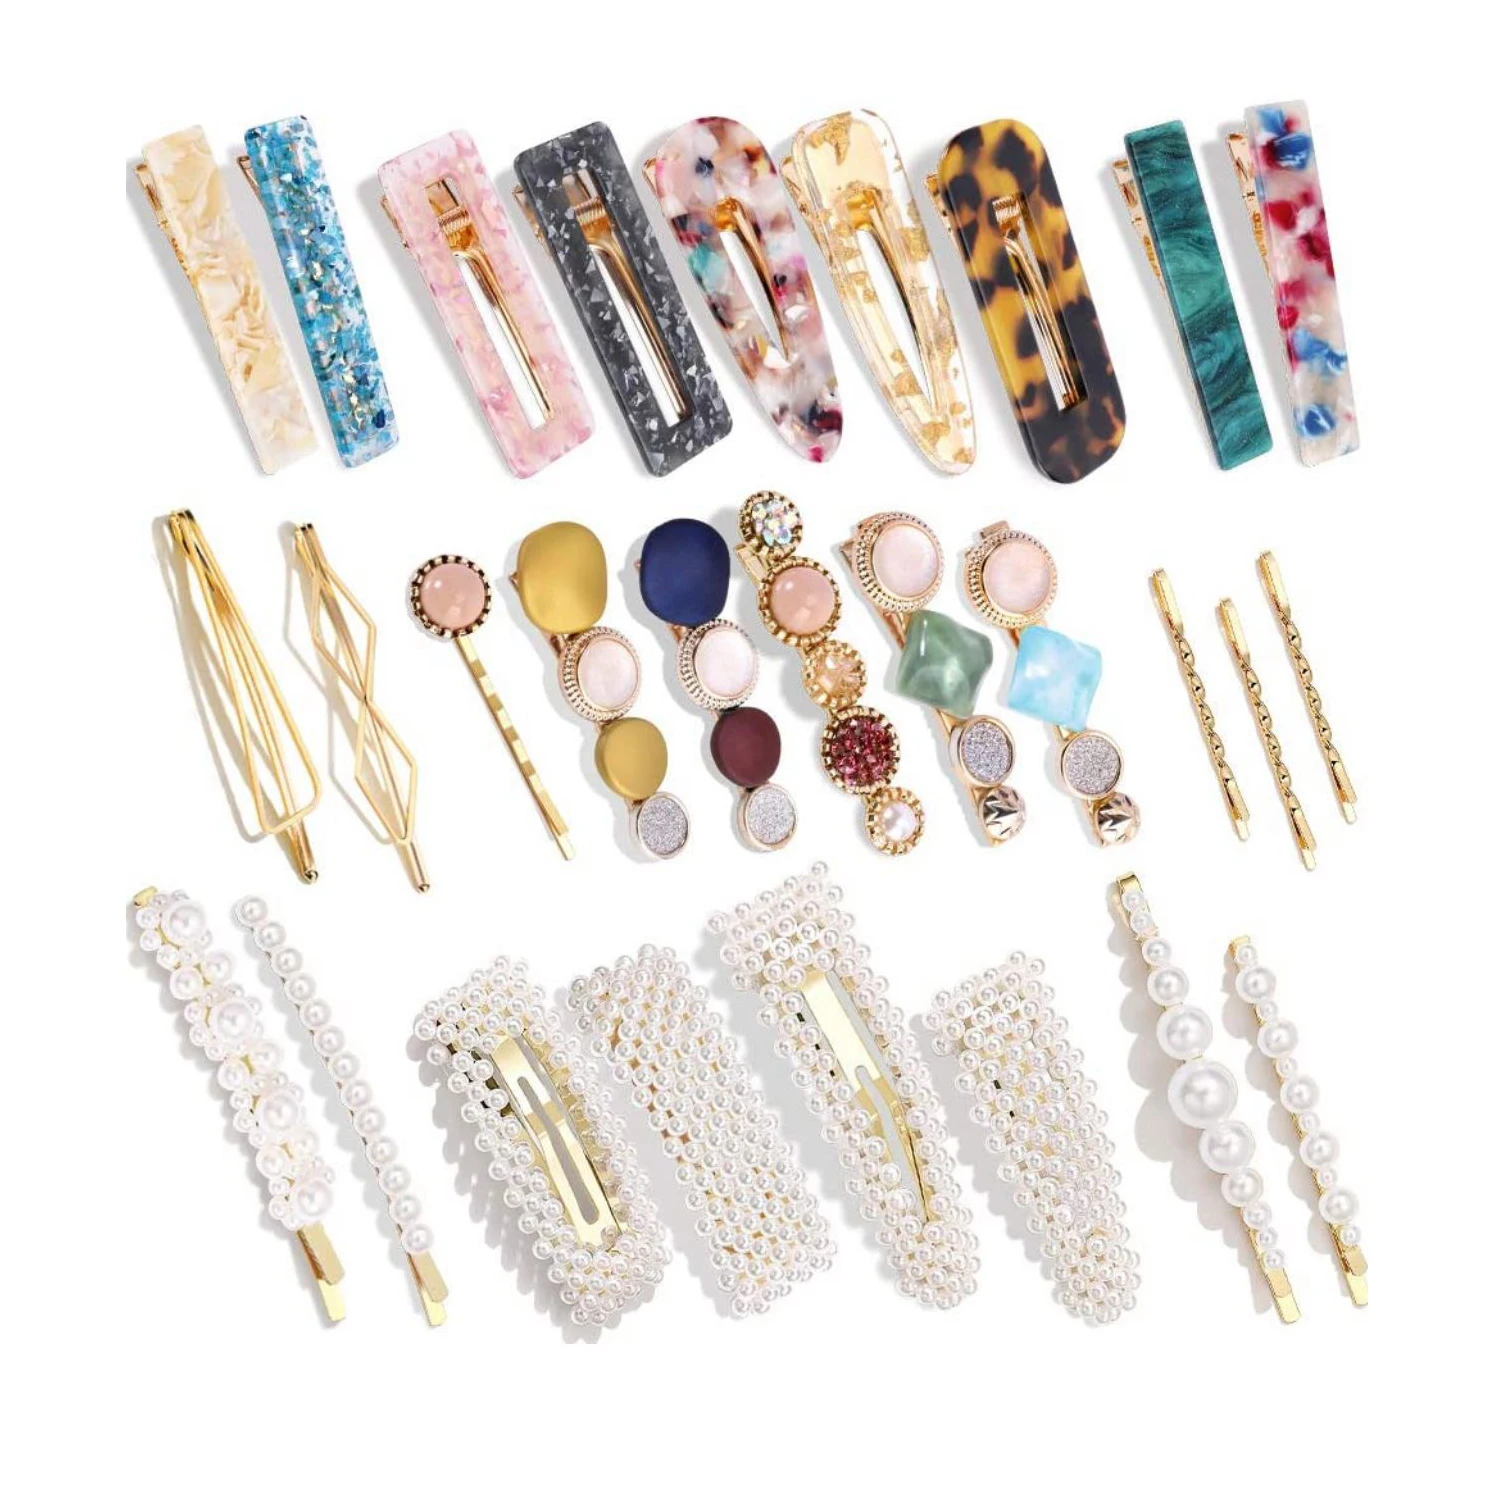 Handmade Hair Barrettes Pearls and Acrylic Resin Hair Clips for women girls hair accessories